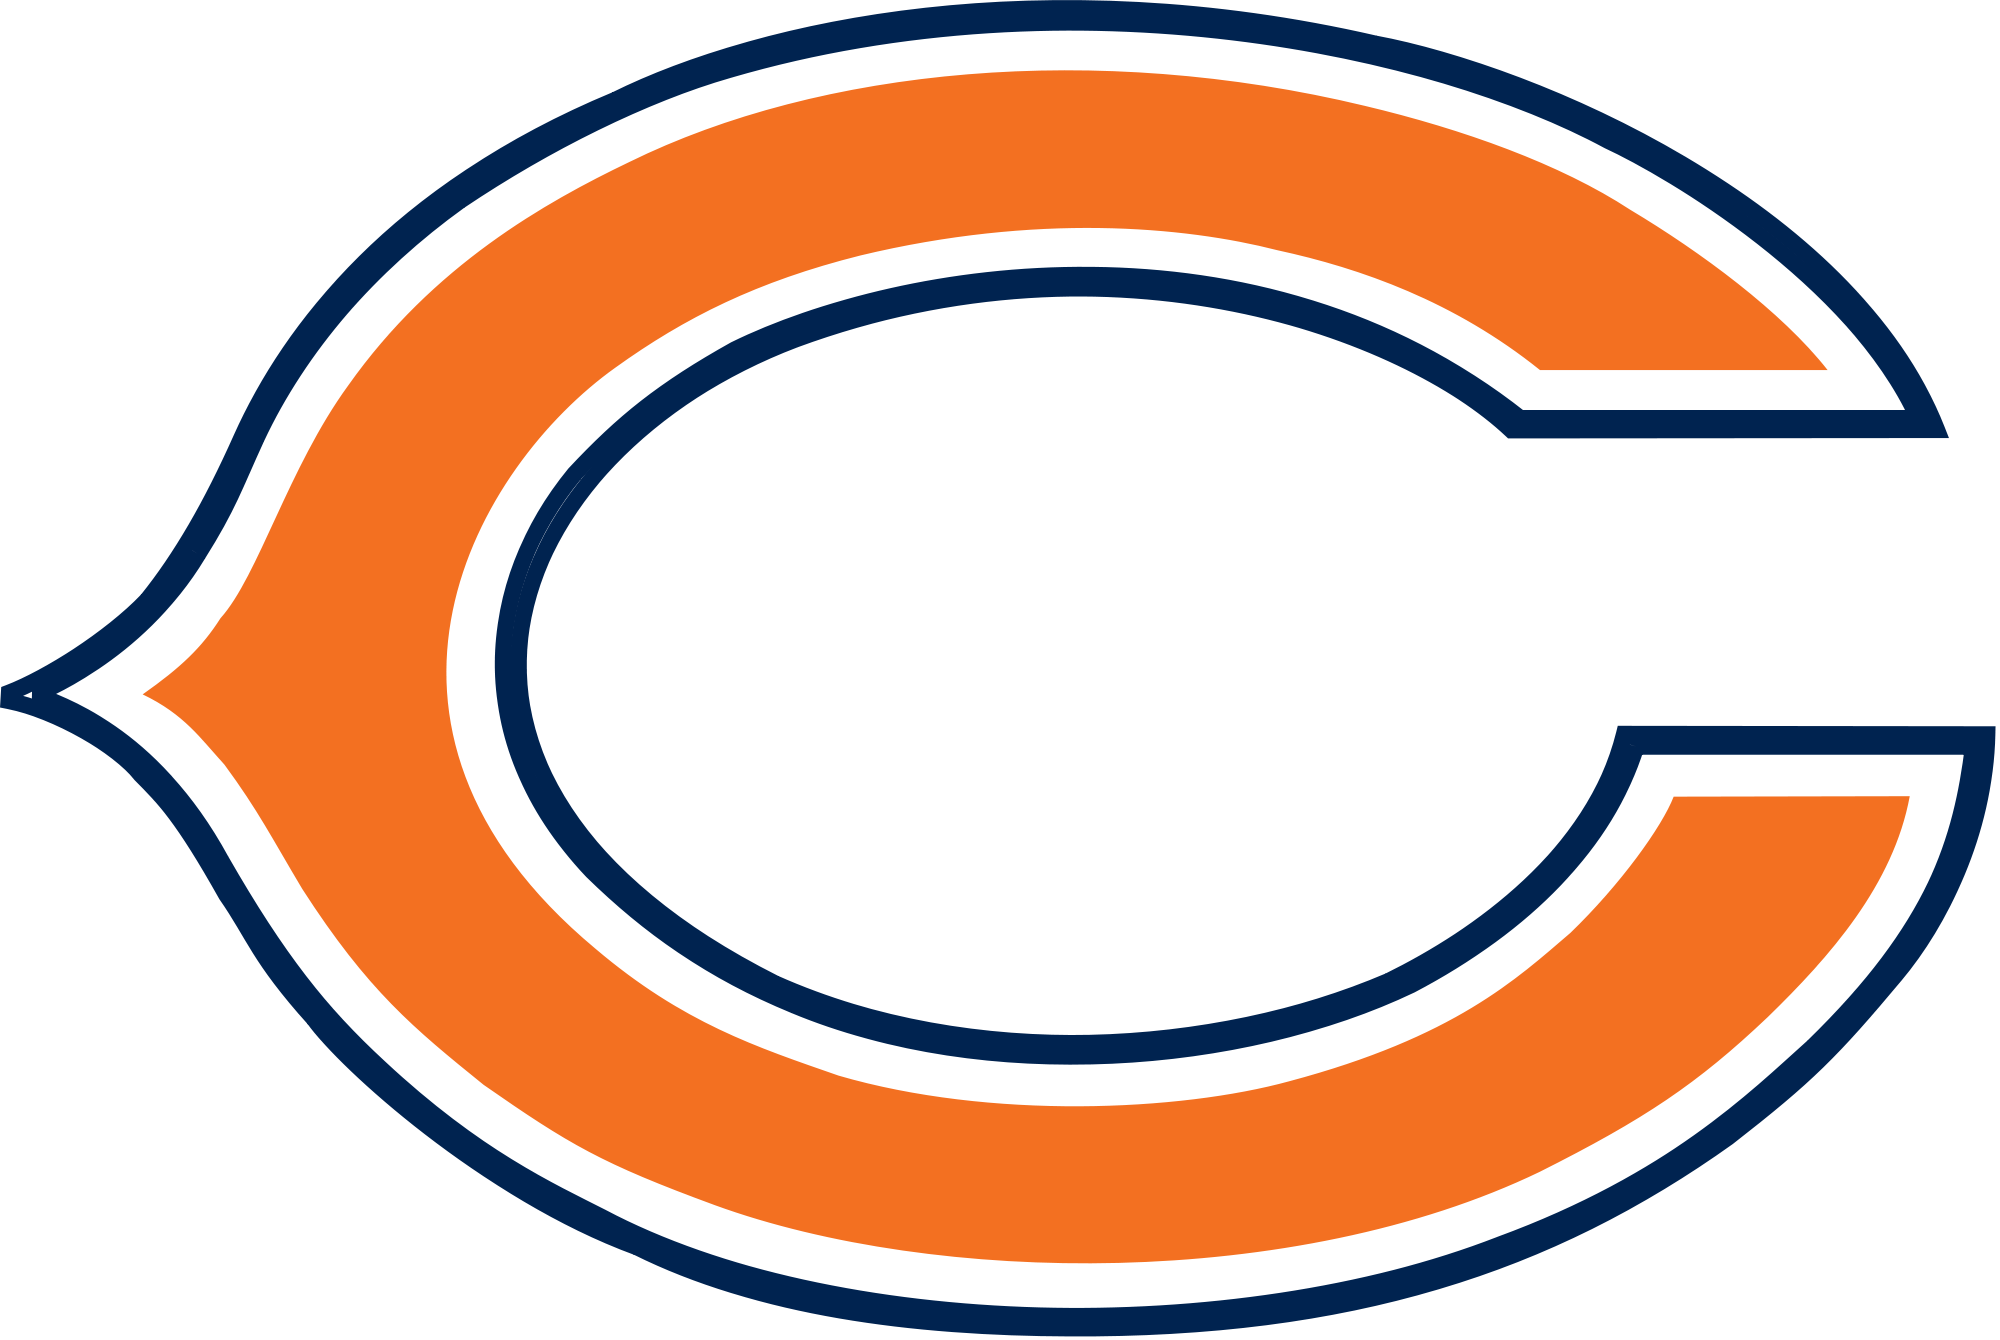 Chicago Bears football with M